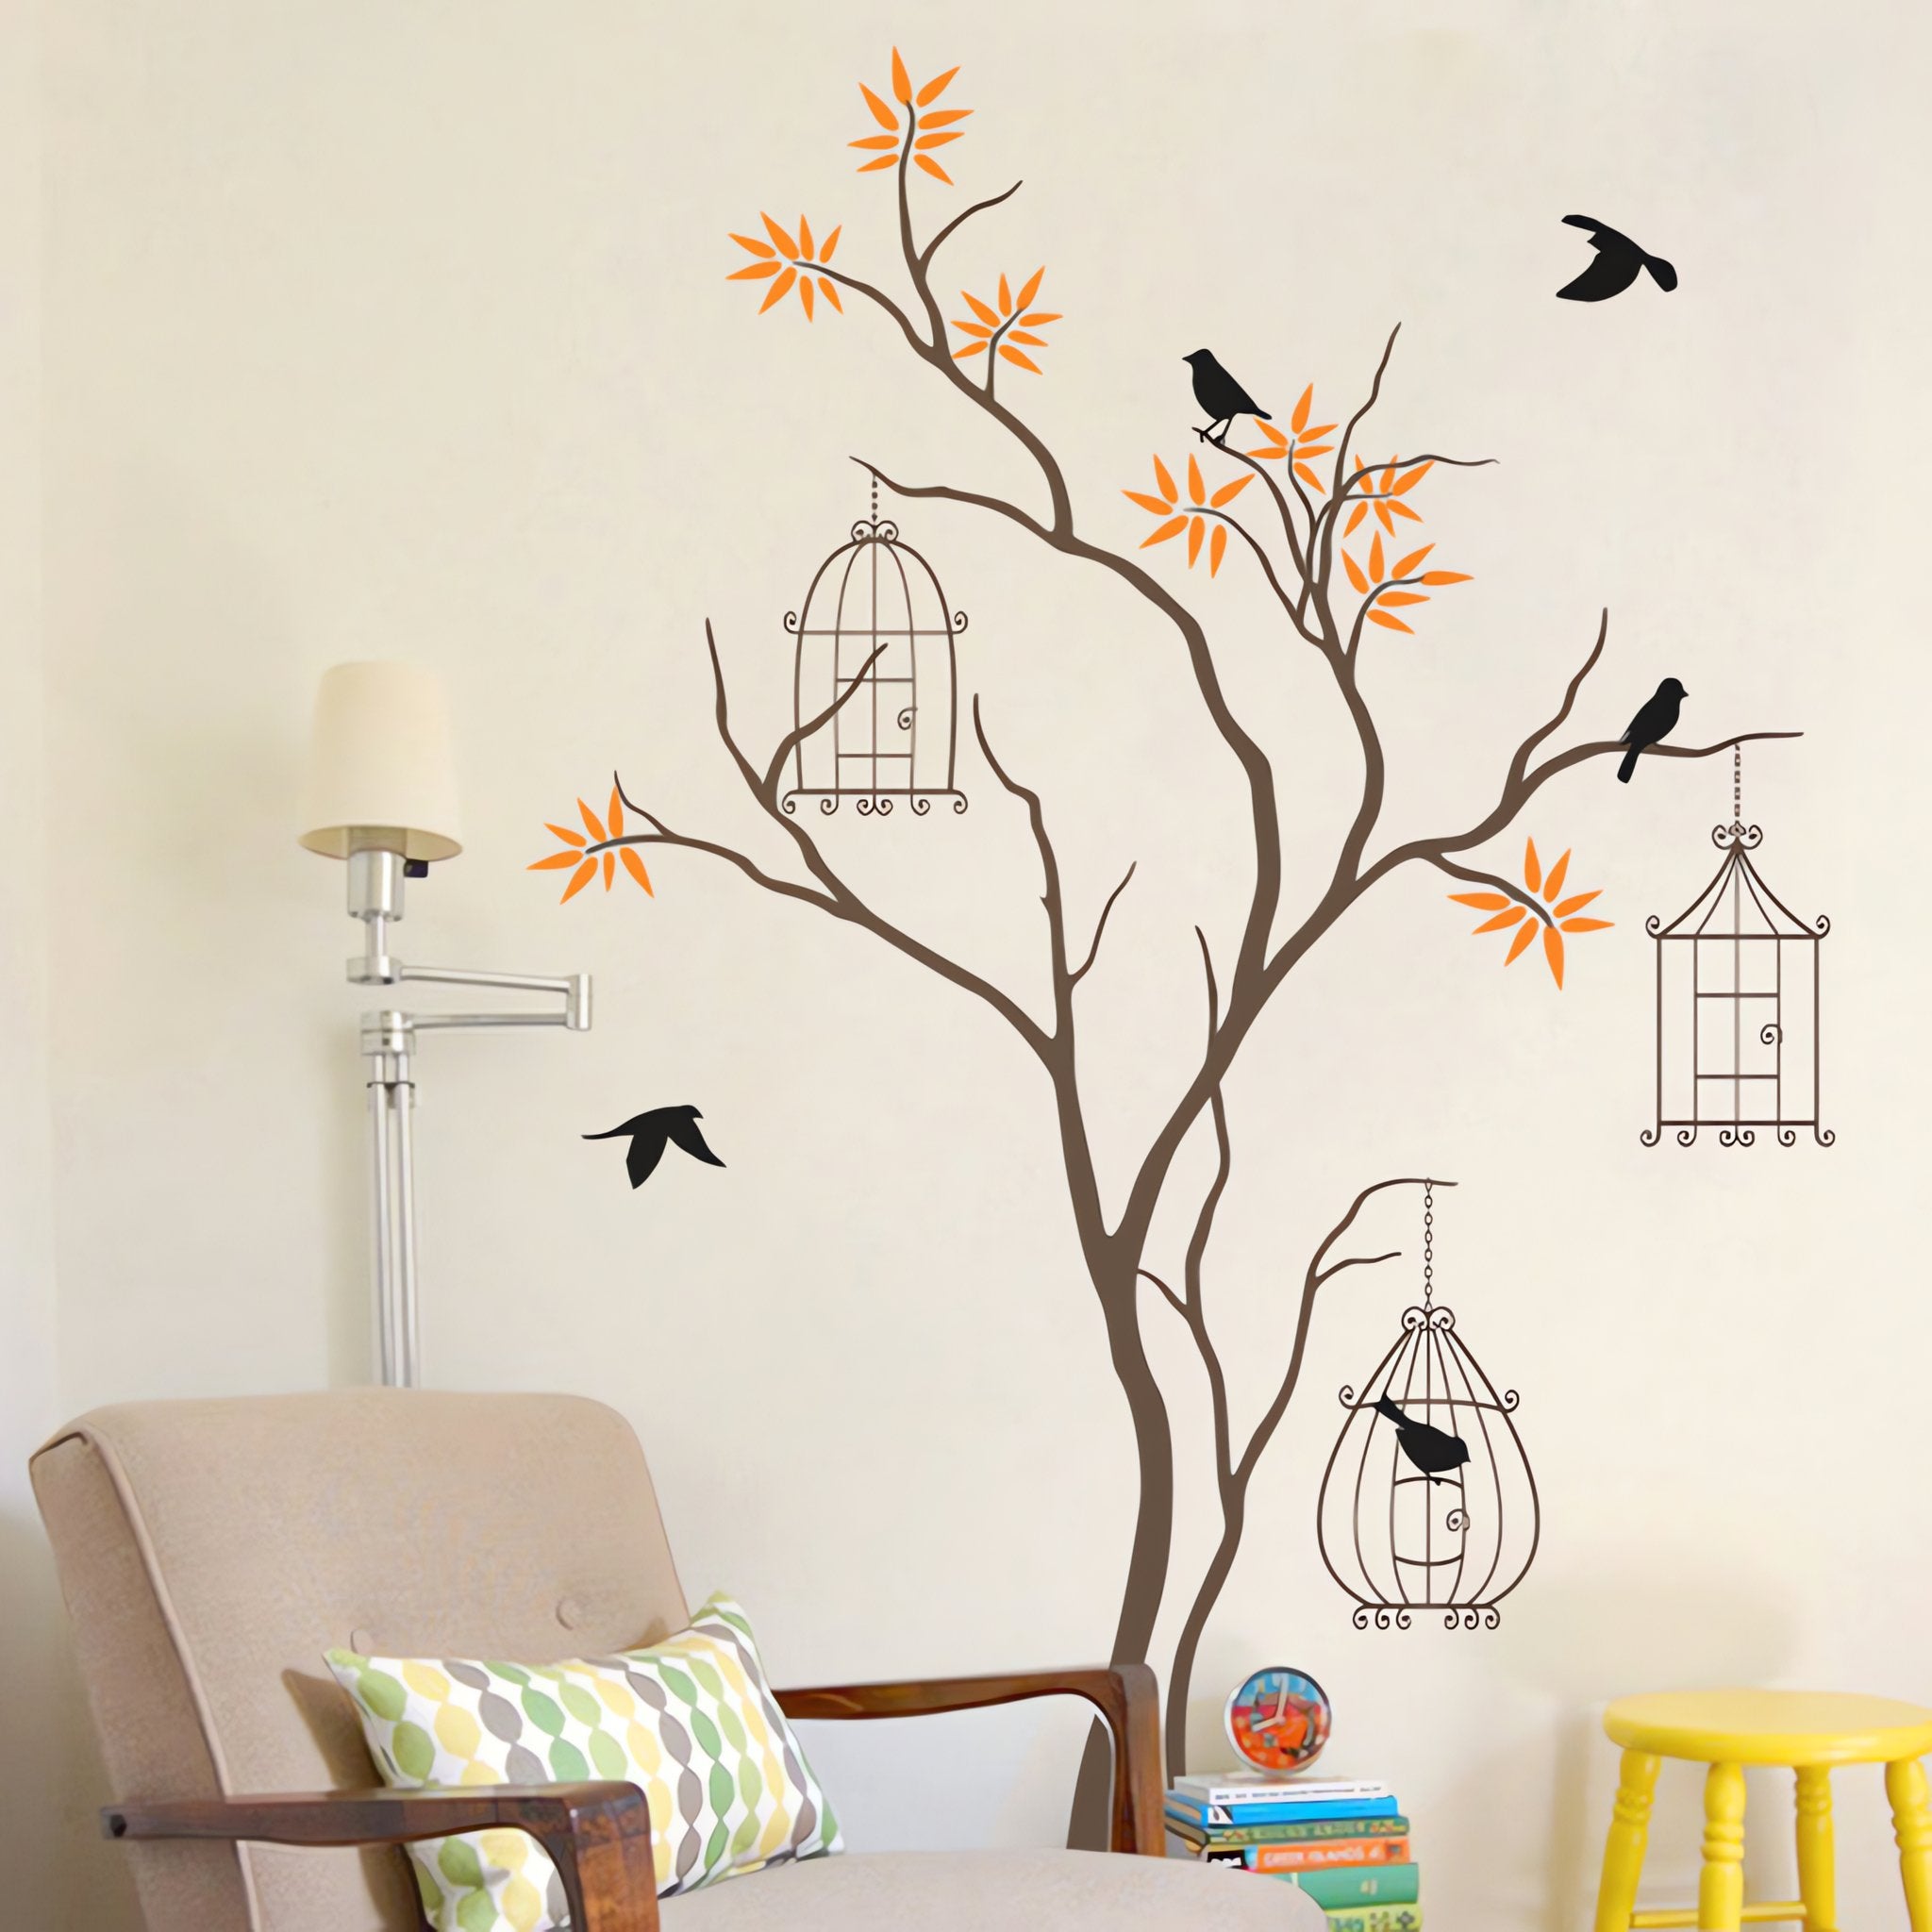 Tree wall sticker of birds and bird cages in a room with a comfy chair.